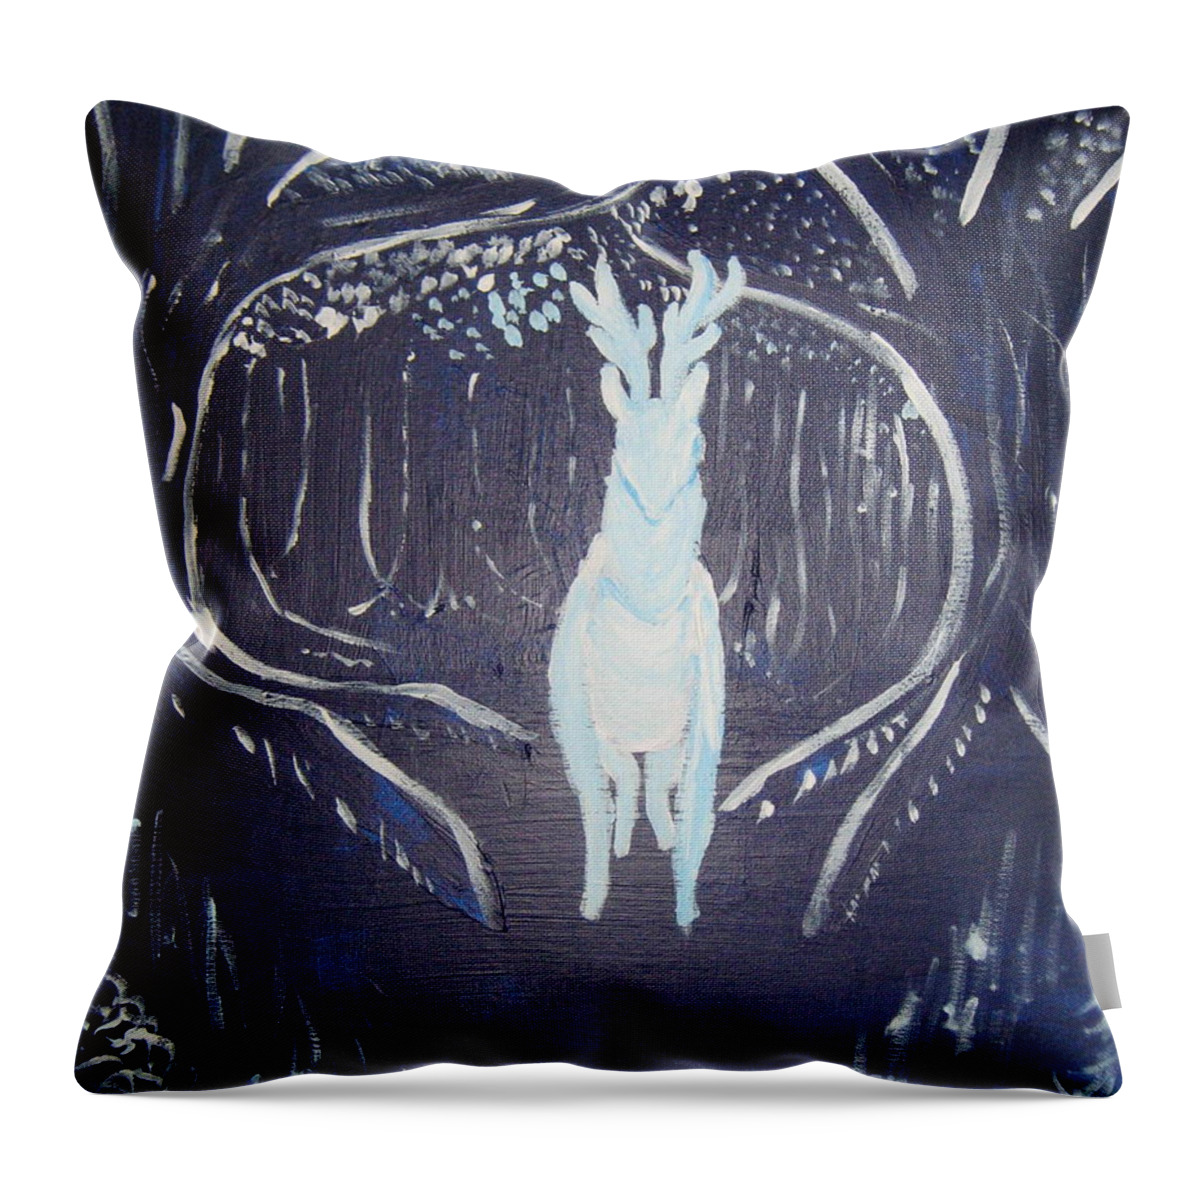 Deer Throw Pillow featuring the painting What Walks These Woods by Wendy Coulson